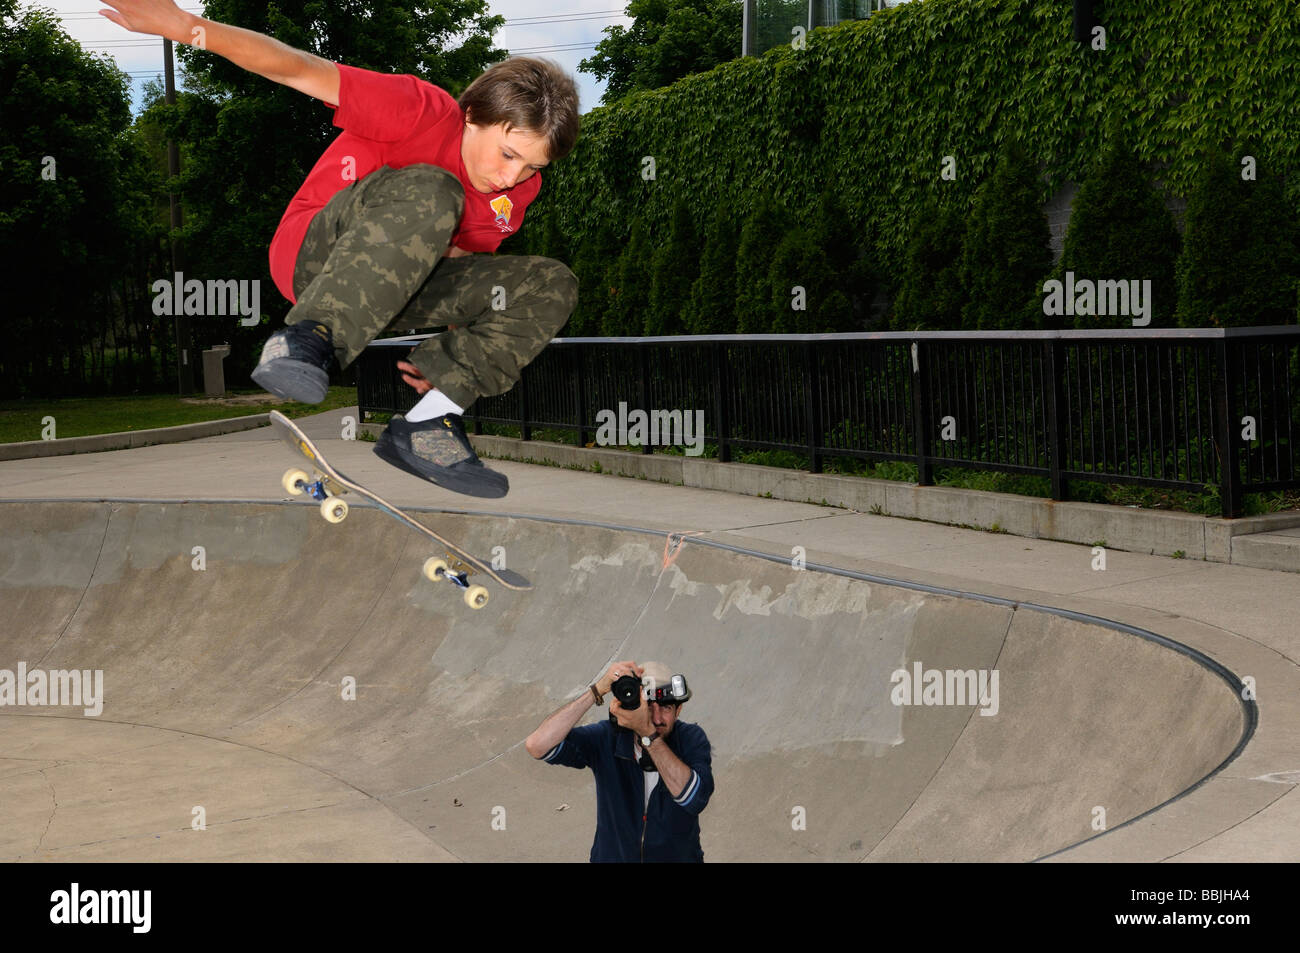 Young boy airborne on a skateboard above a concrete bowl at an outdoor Toronto Park with photographer Stock Photo